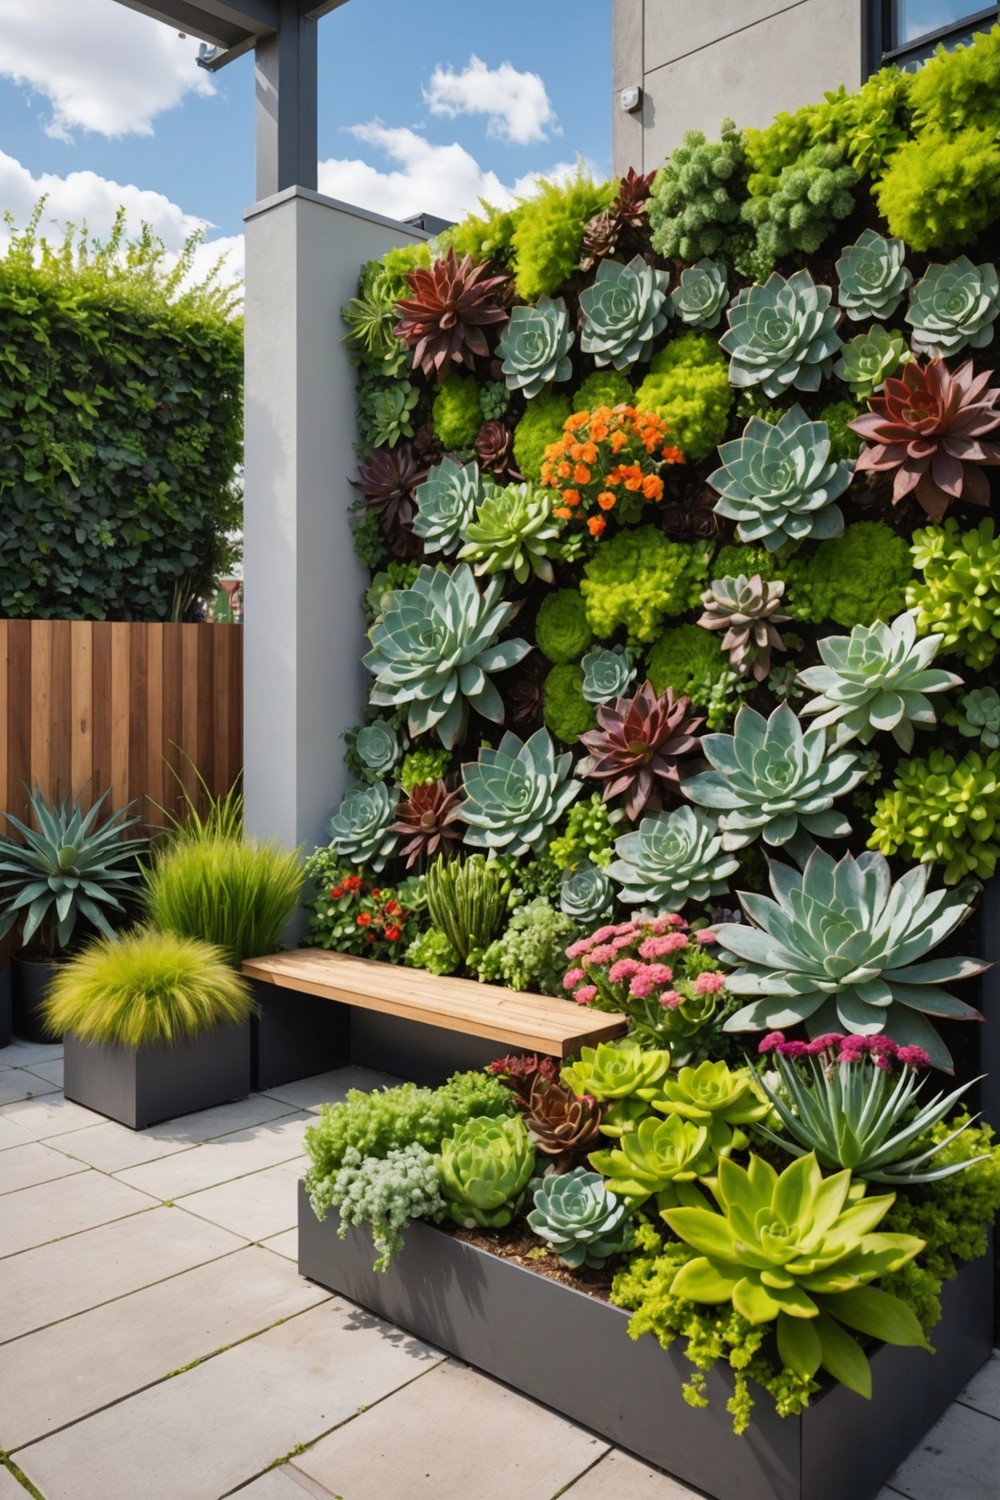 Incorporating a Vertical Garden or Living Wall